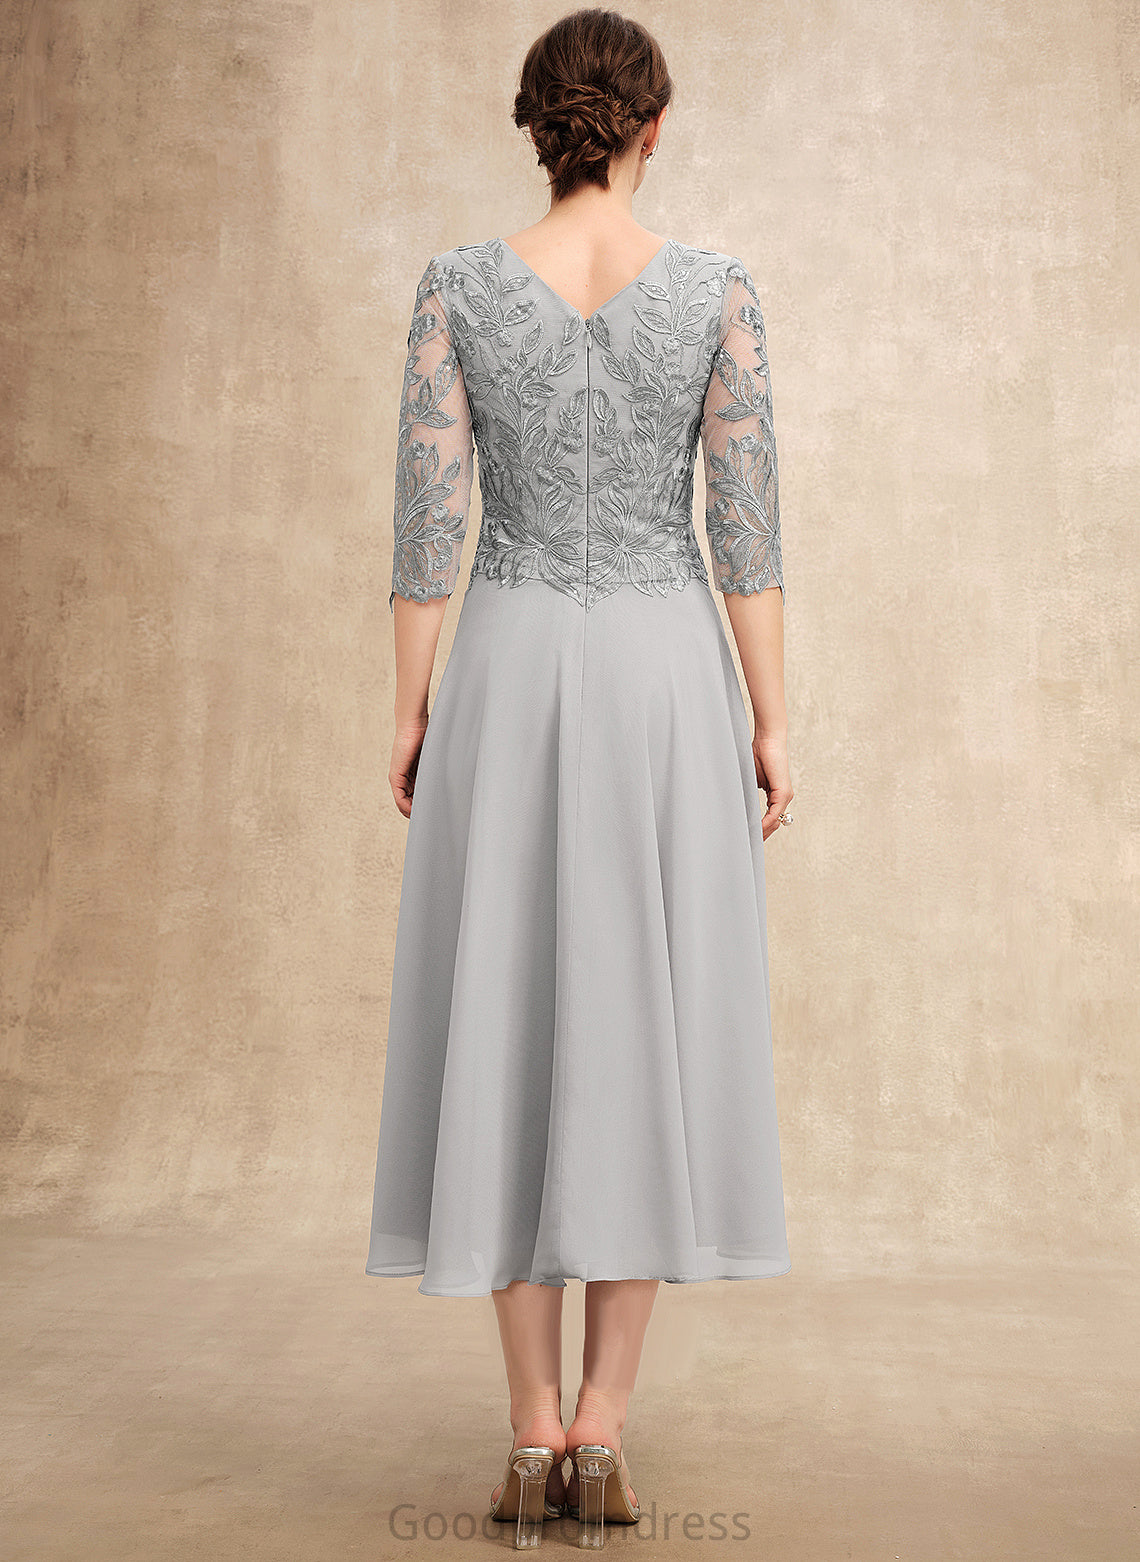 Bride Lace A-Line the Dress Jaelynn Mother of the Bride Dresses With Neck of Chiffon Sequins Scoop Mother Tea-Length